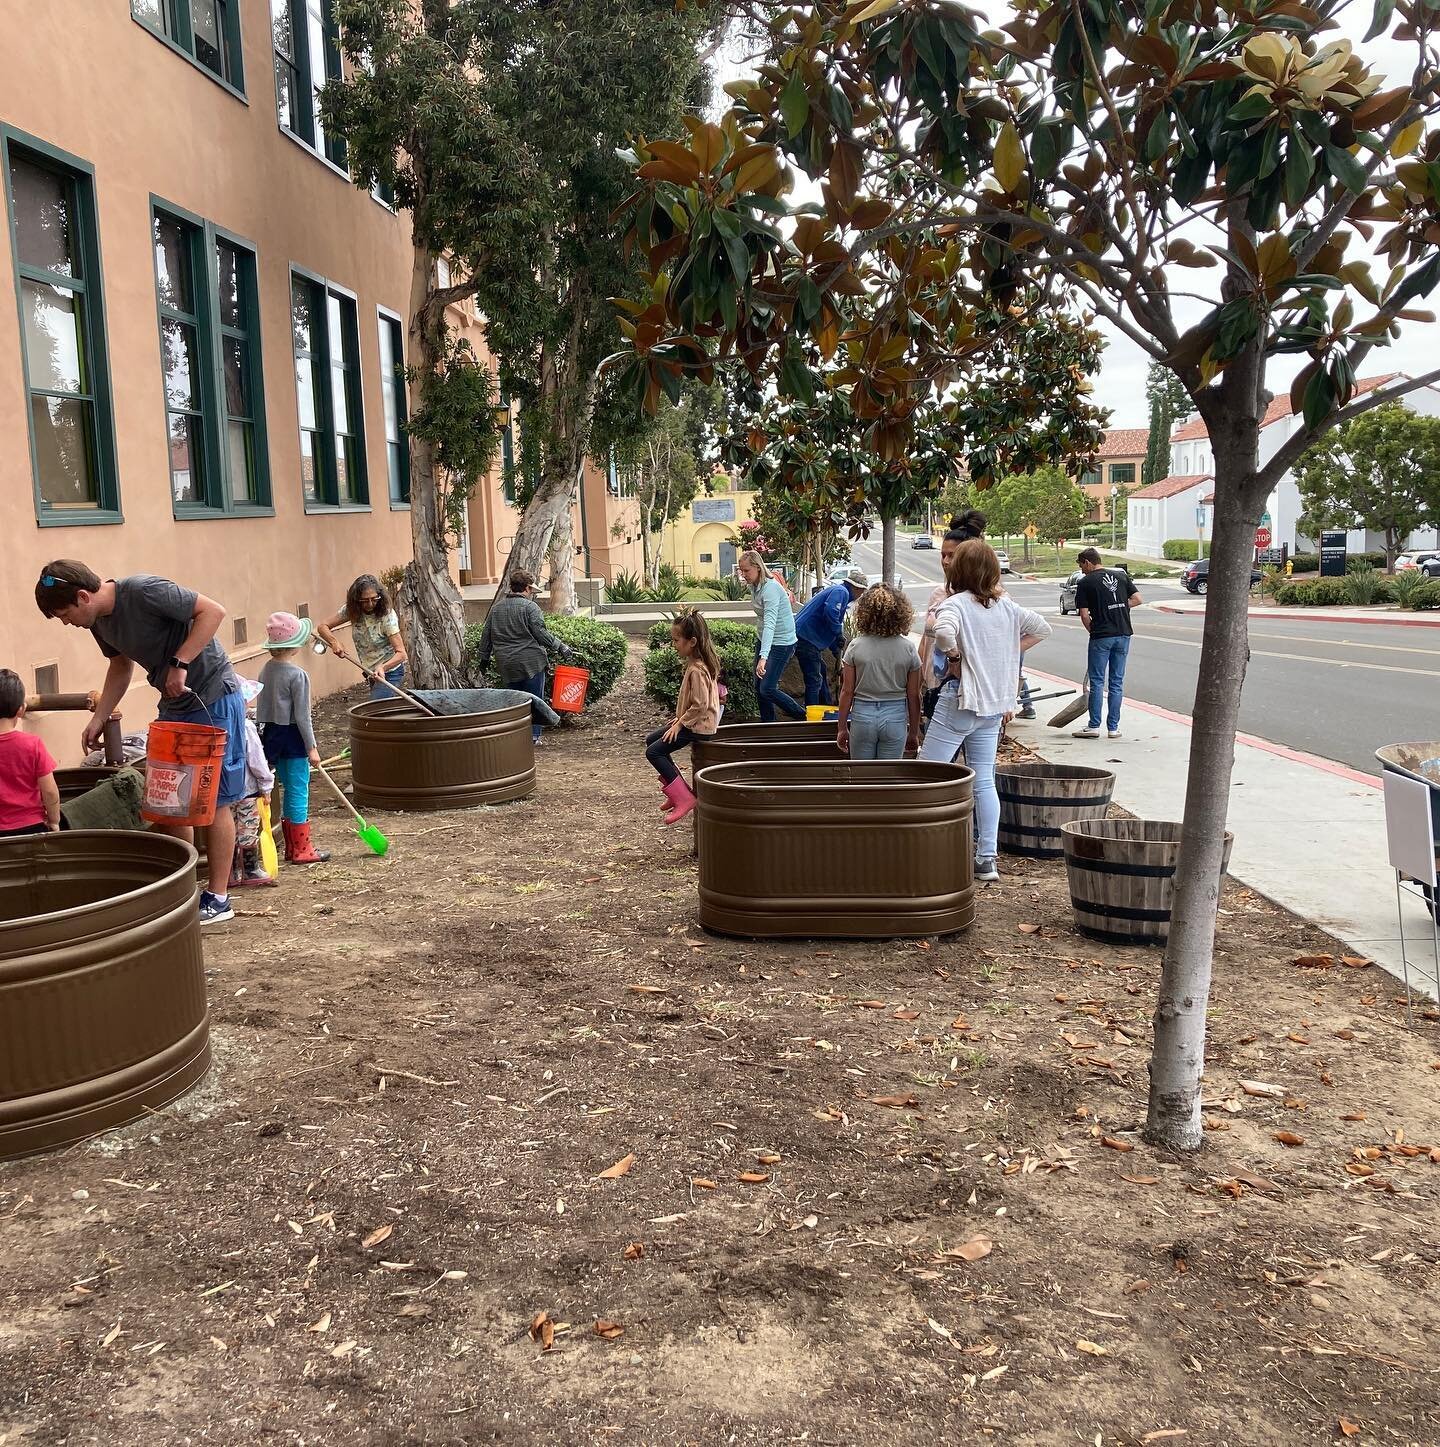 It was a #good week. We were blessed to facilitate the garden installation @libertystation with two transformative organizations @sandiegocraftcollective and @the.treehouse.academy They will share the garden to teach the children craft, cultivation a